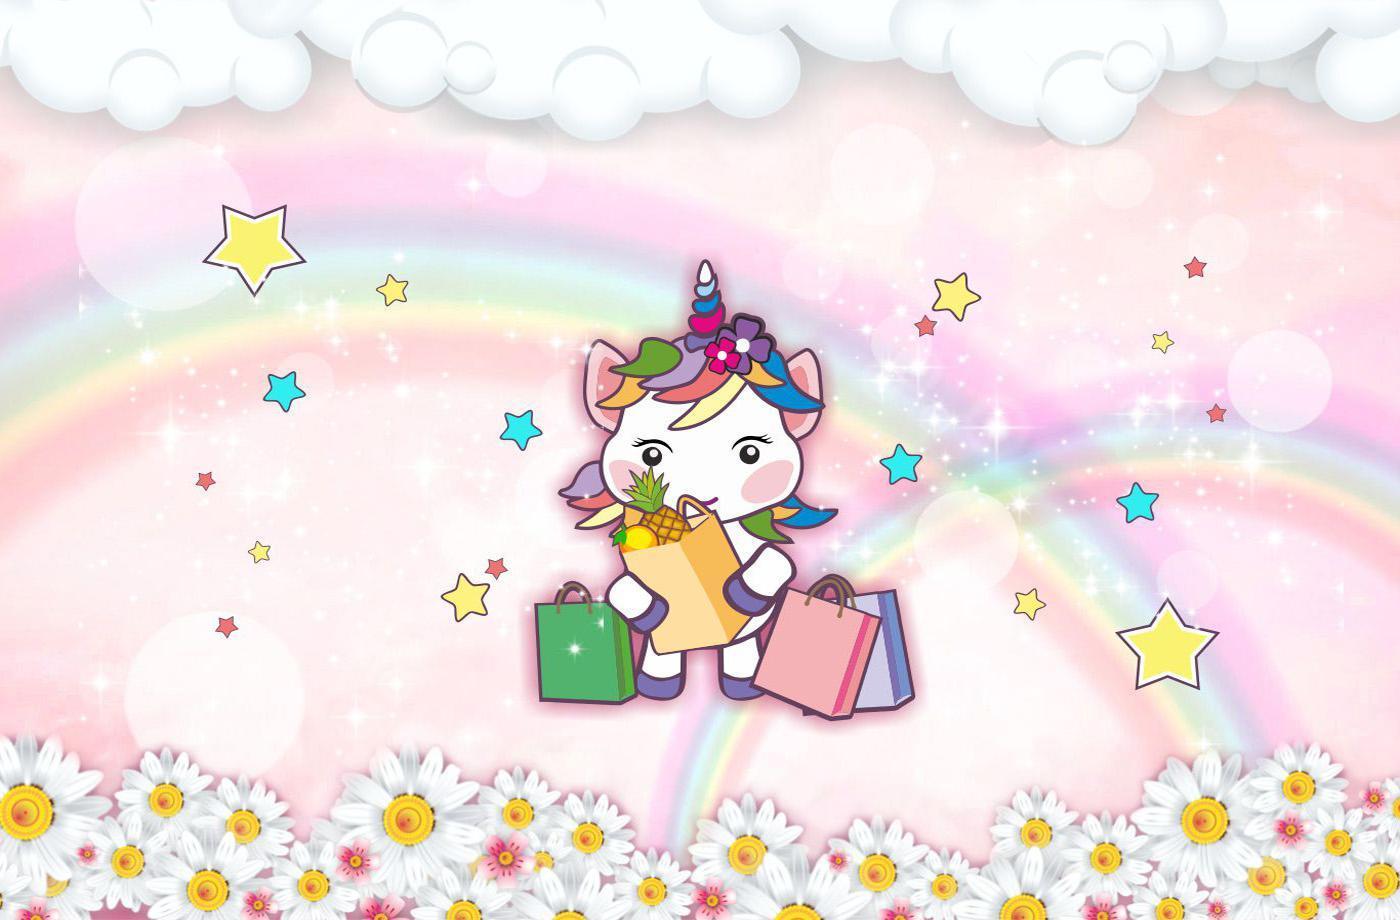 Cute Unicorn Shelly Kawaii Live wallpaper for Android